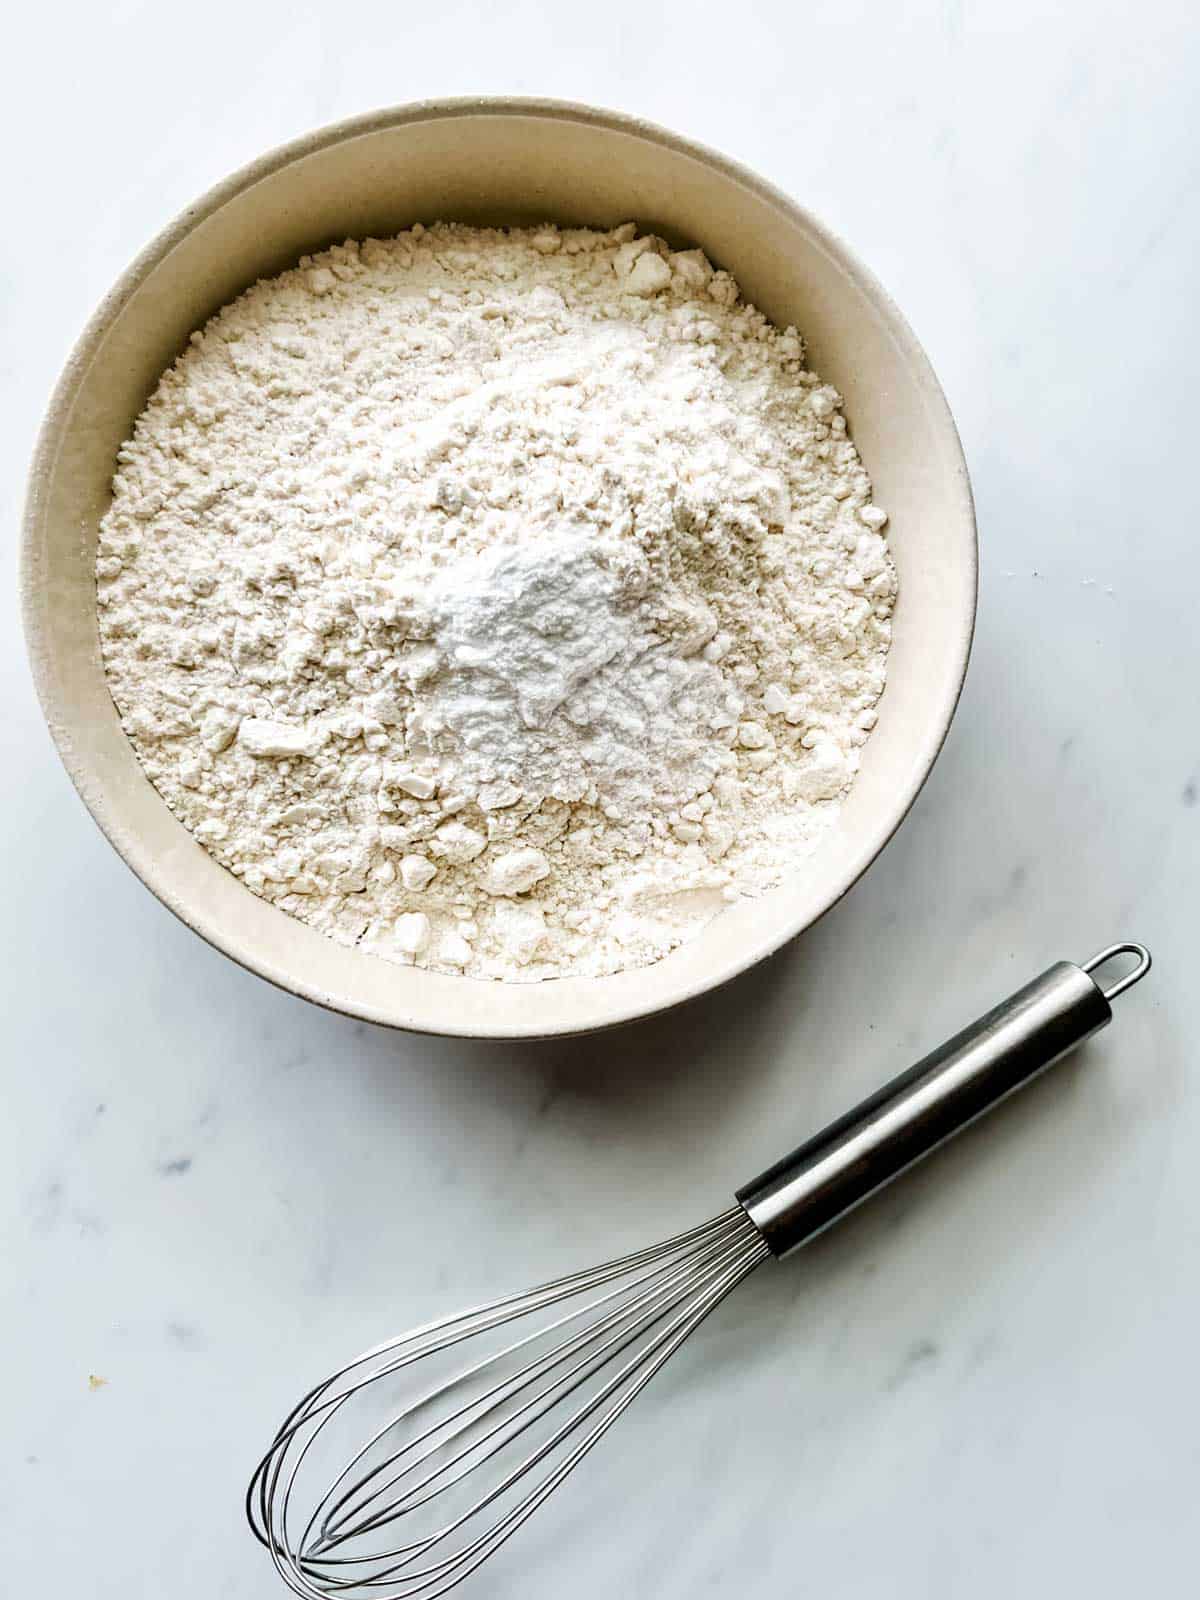 Photo of dry ingredients for cookies in a bowl with a whisk next to it.